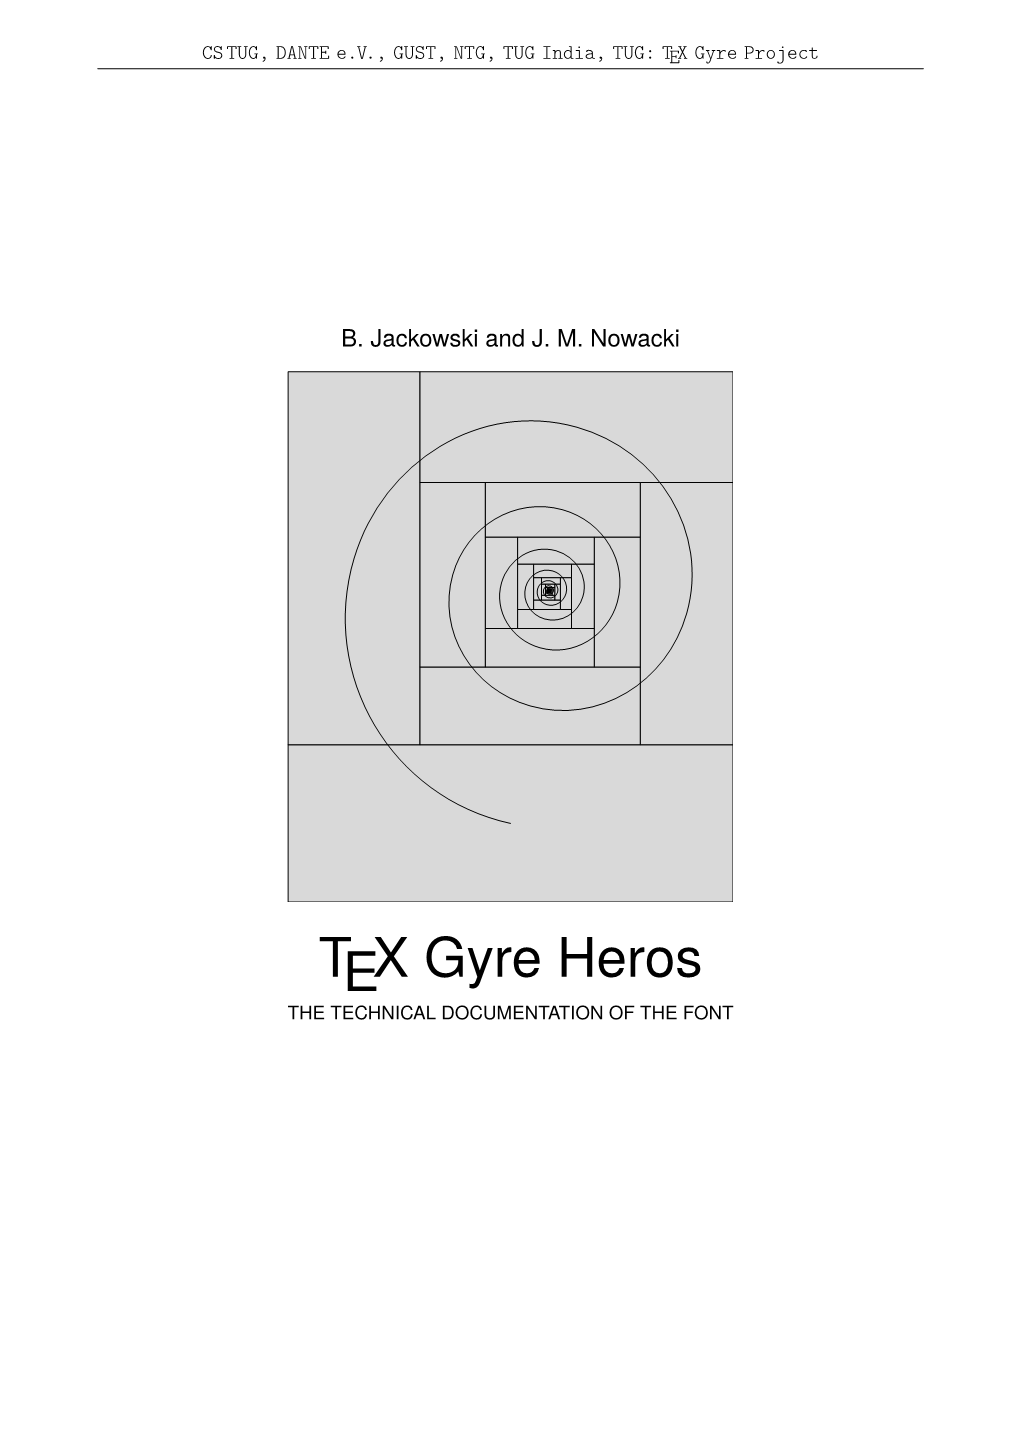 TEX Gyre Heros the TECHNICAL DOCUMENTATION of the FONT the Technical Documentation of TEX Gyre Heros, Page 2